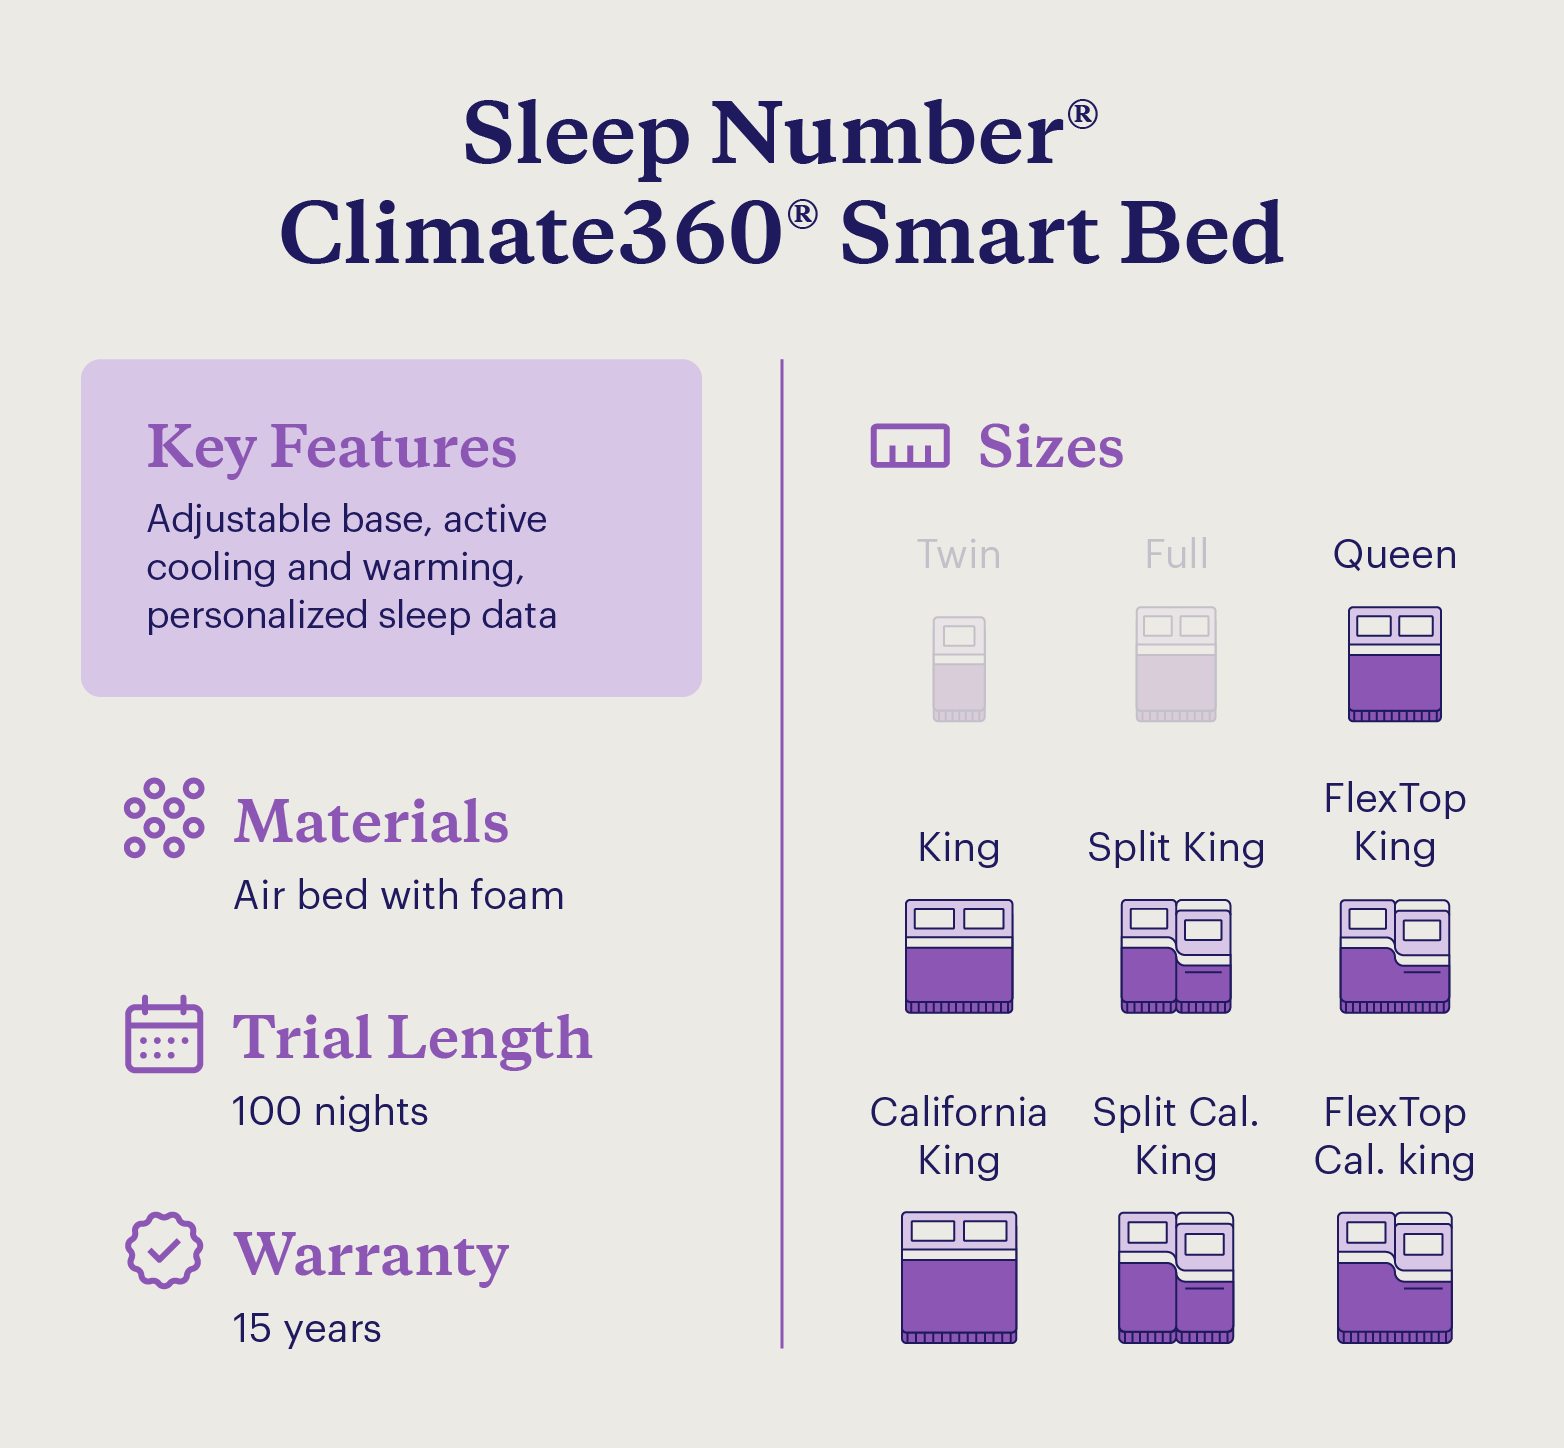 A chart showing information about the Sleep Number Climate360 Smart Bed. 